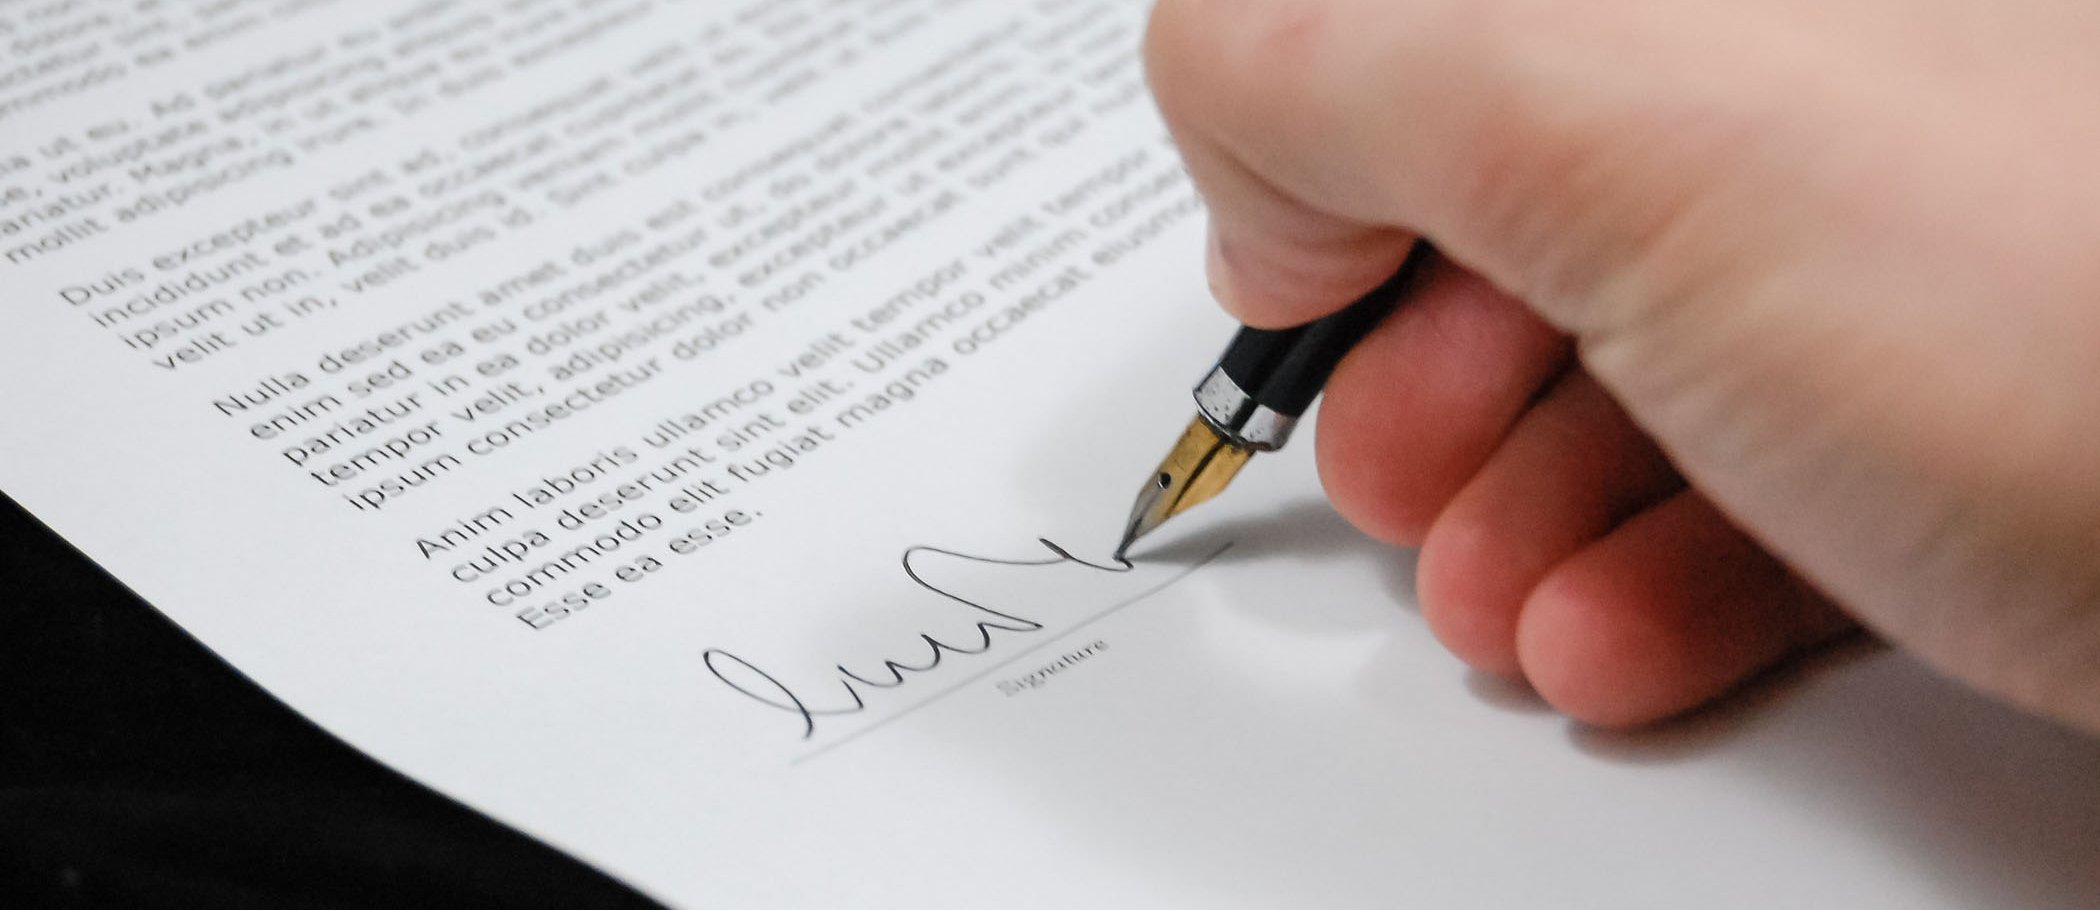 A person signing a document with a fountain pen